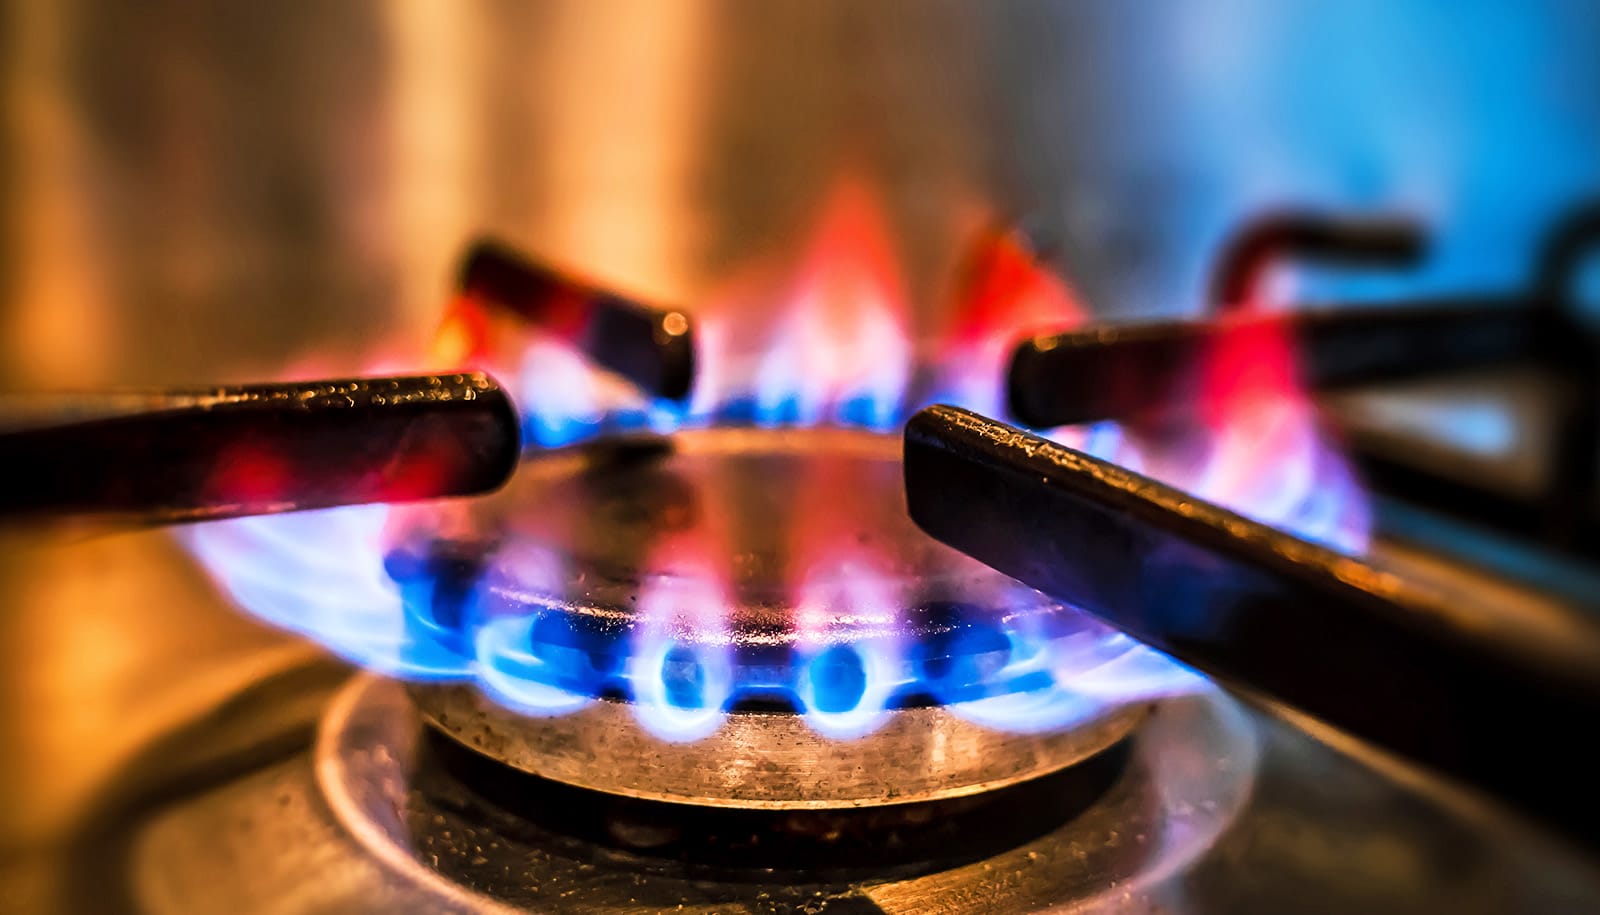 Your gas stove may emit more nanoparticles than car exhaust - Futurity: Research News